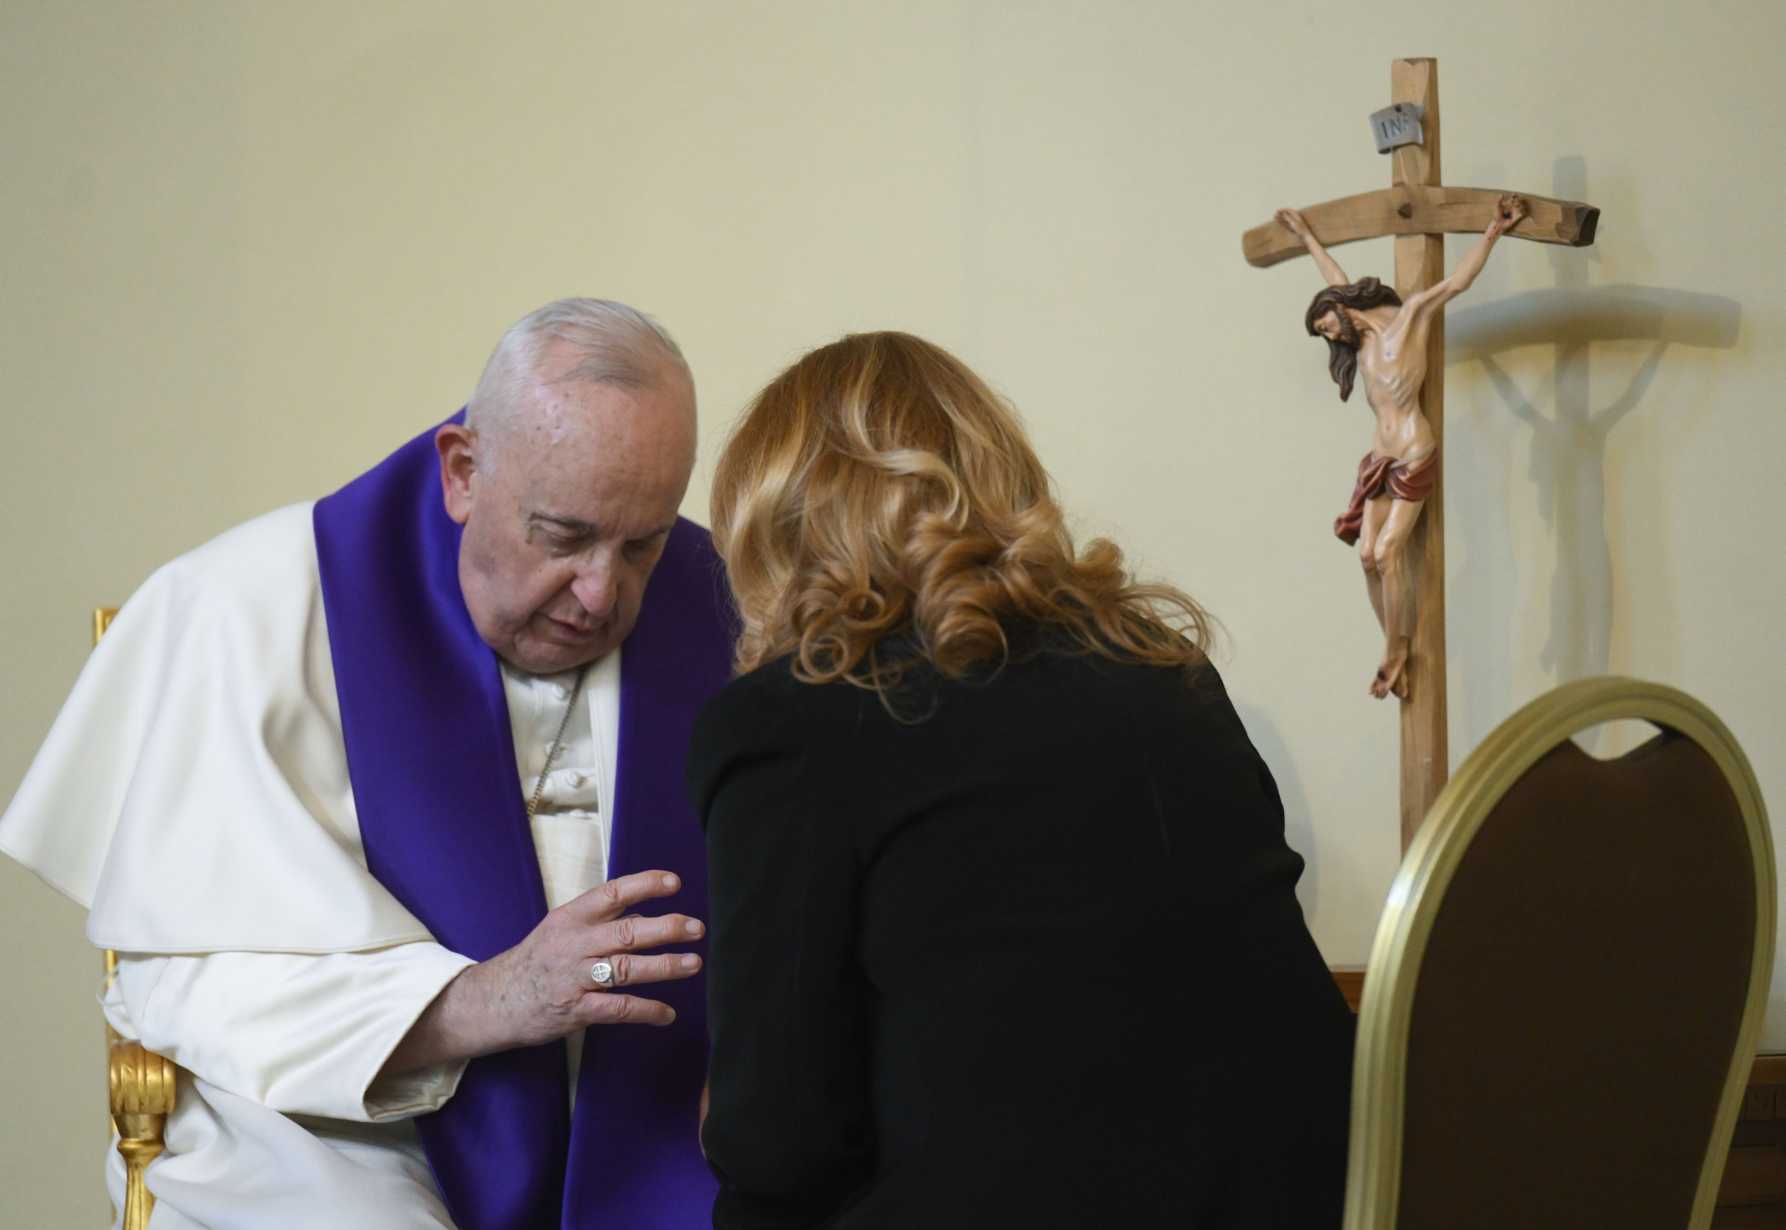 A heart filled with scorn, vain presumption is a path to perdition, pope says